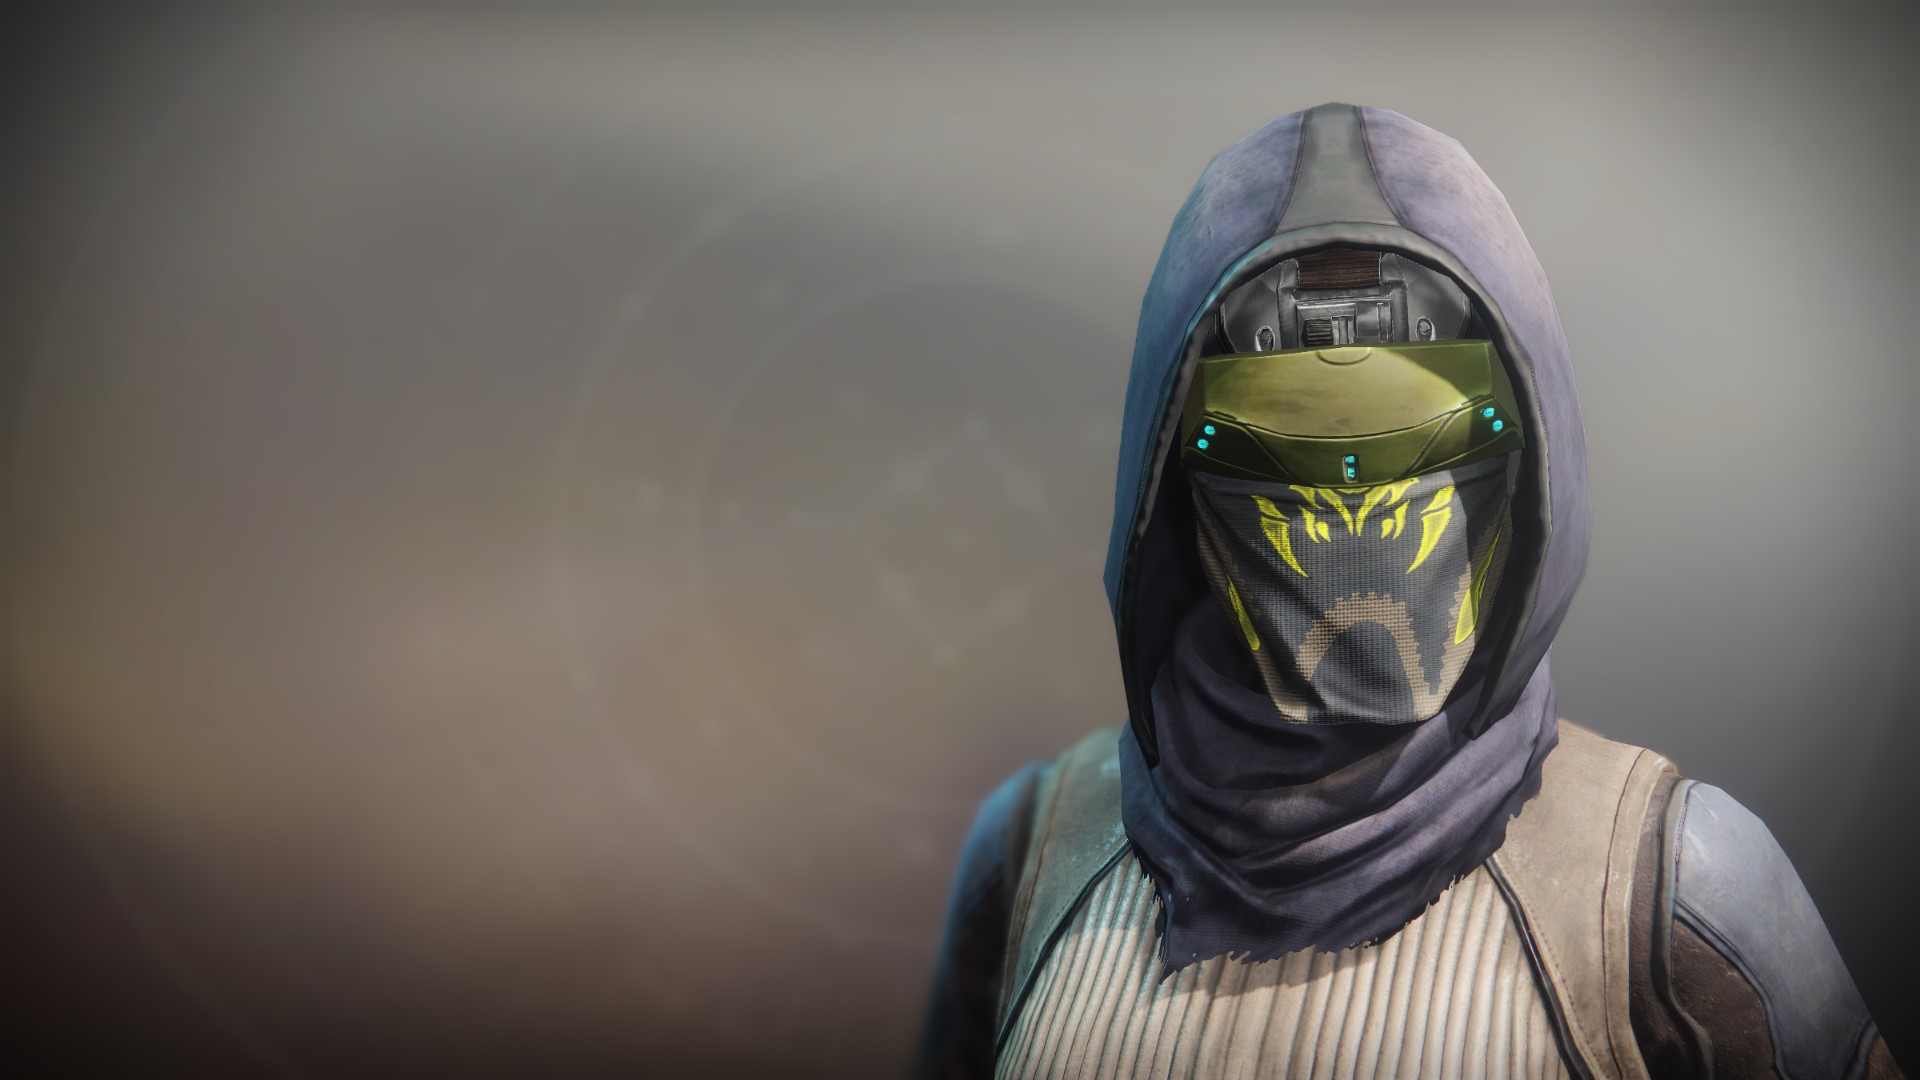 An in-game render of the Illicit Sentry Mask.